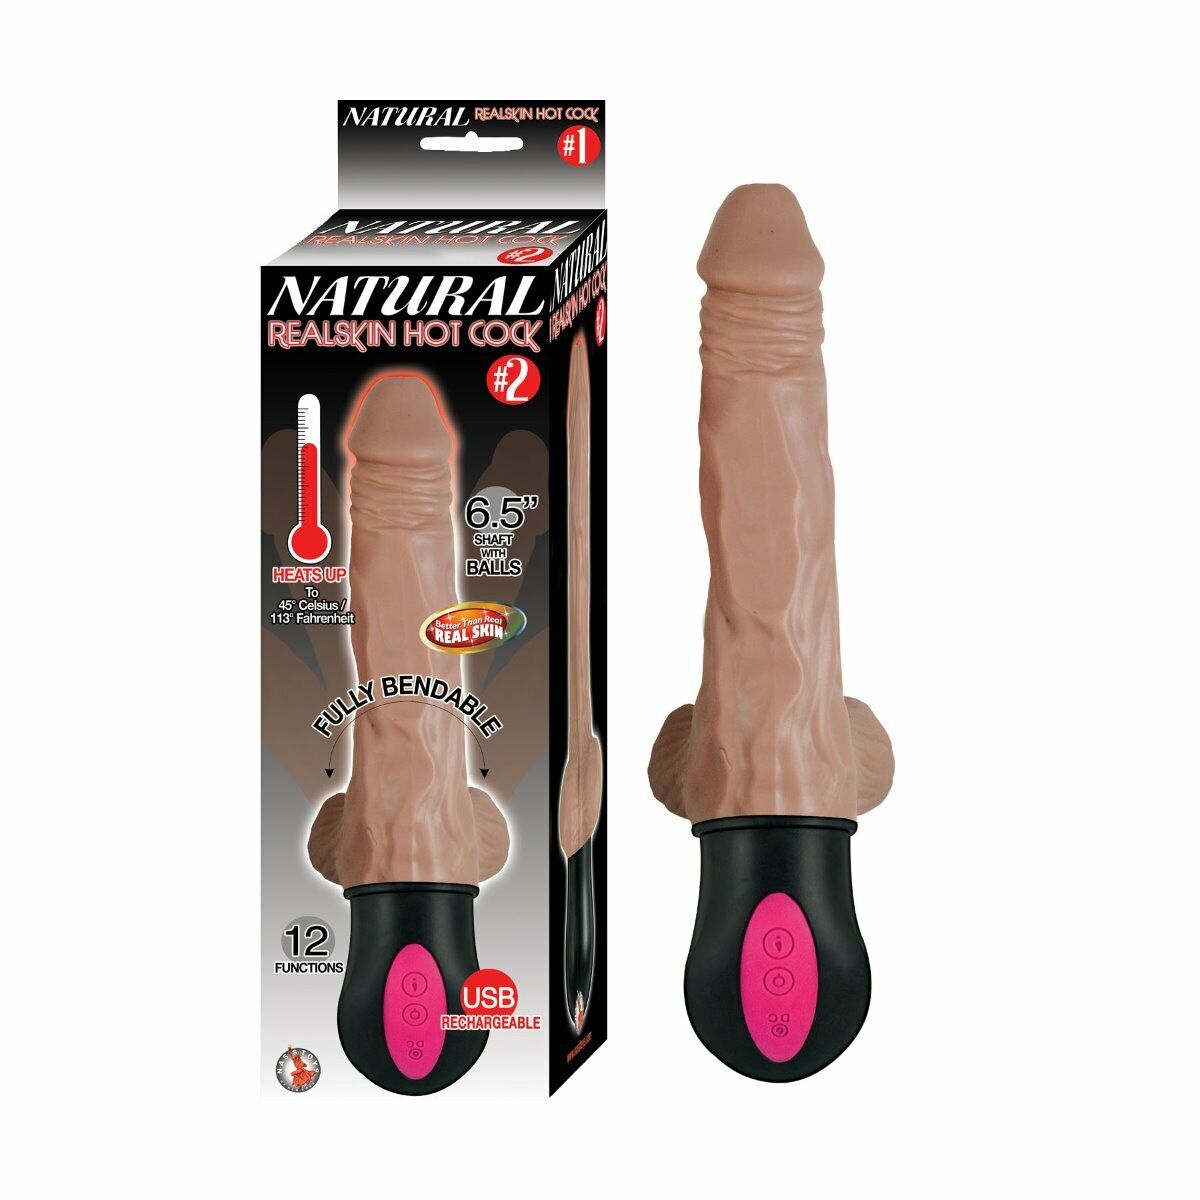 Rechargeable Vibrating Warming Realistic Black Cock Vibe G-spot Anal Dildo Dong